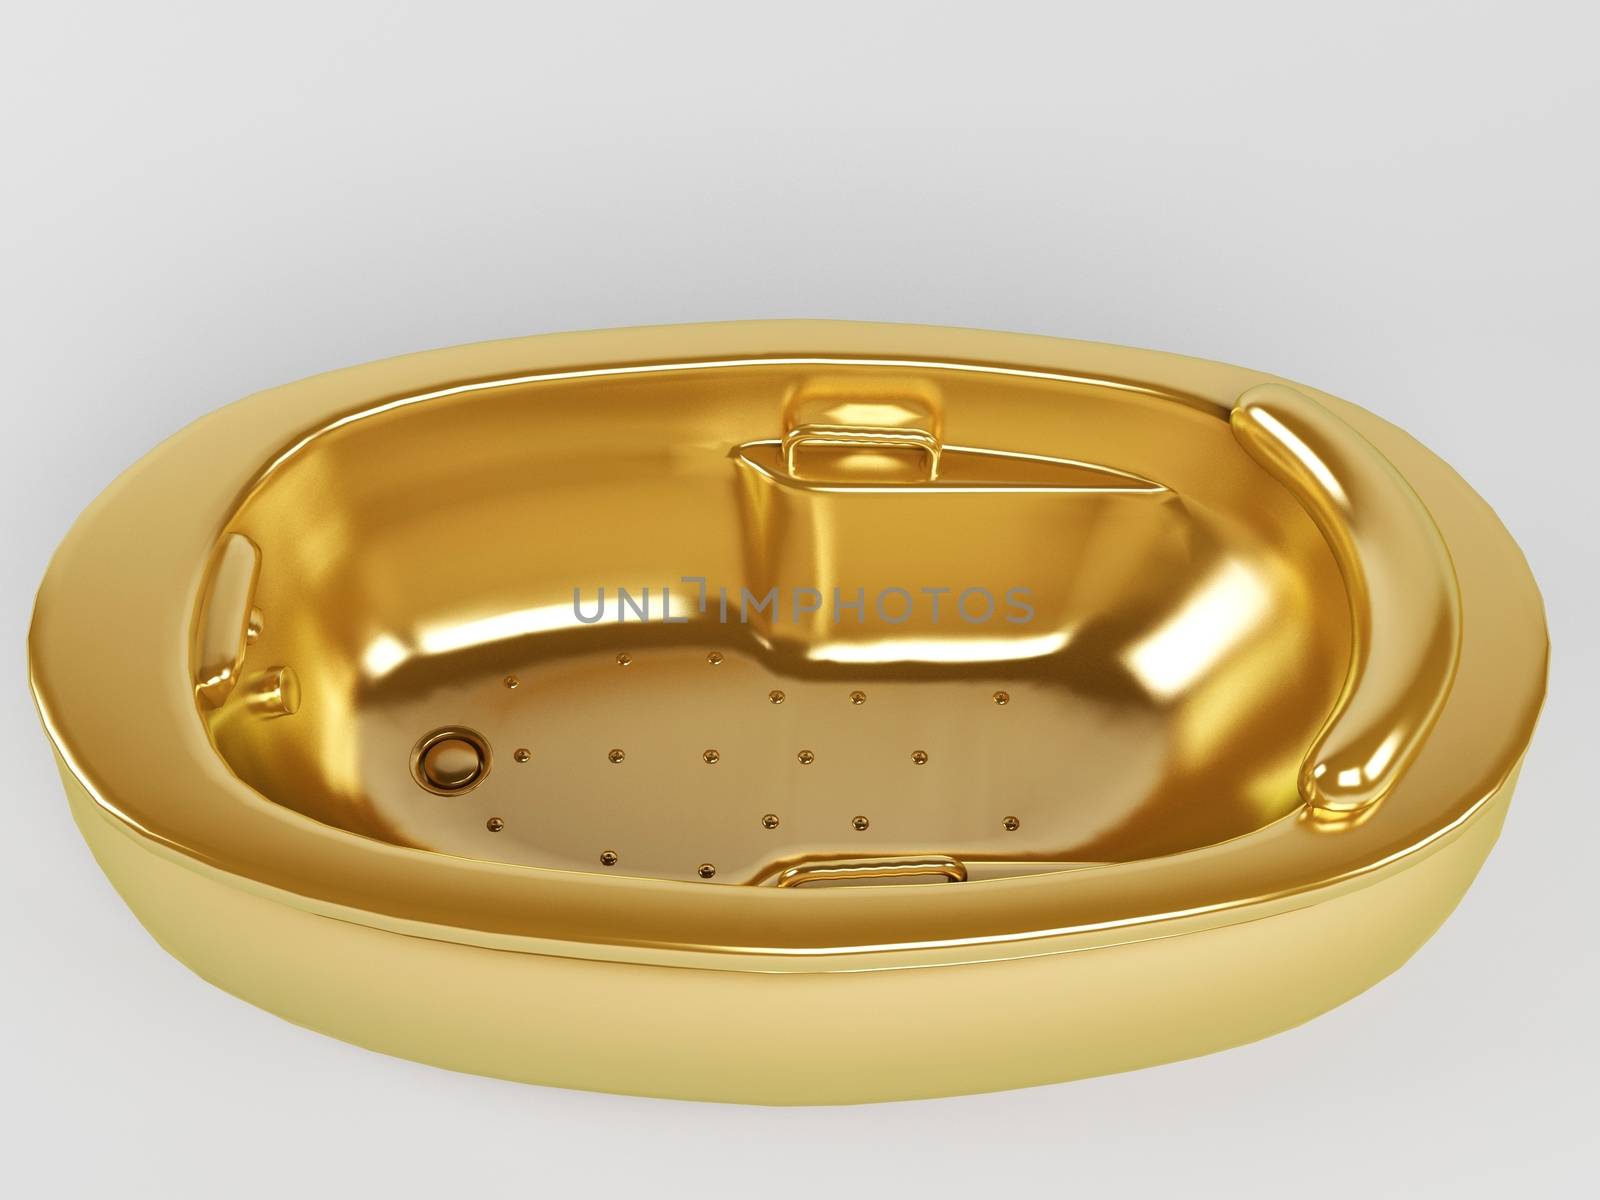 Golden oval bathtub 3d render isolated on a white background